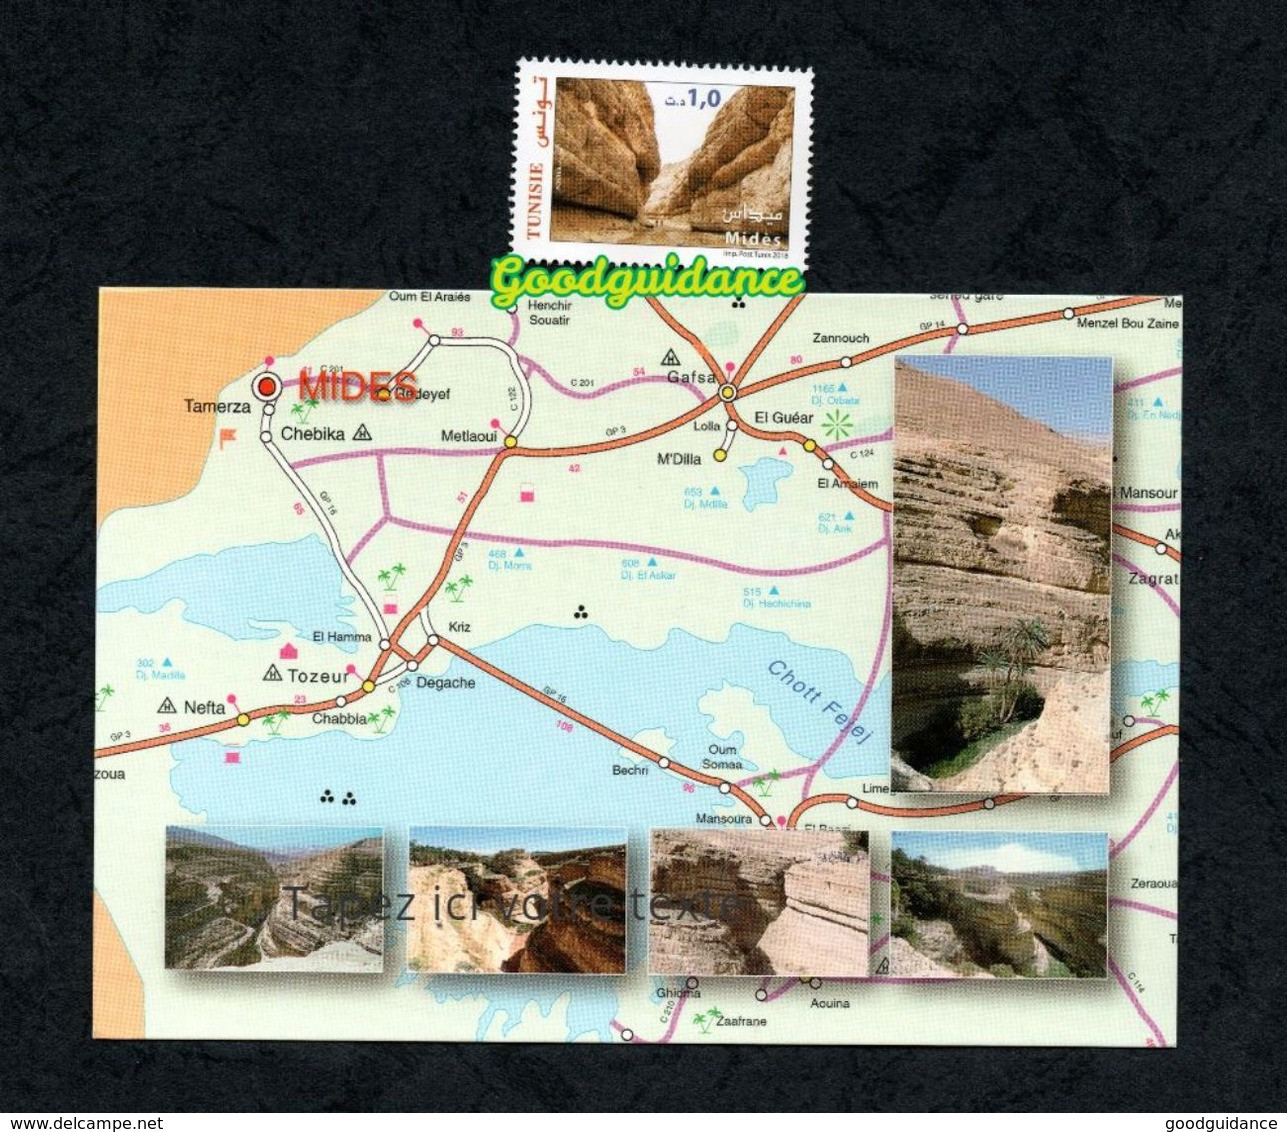 2018- Tunisia- Touristic And Archaeological Sites In Tunisia- Mides Postcard And Stamp MNH** - Archäologie